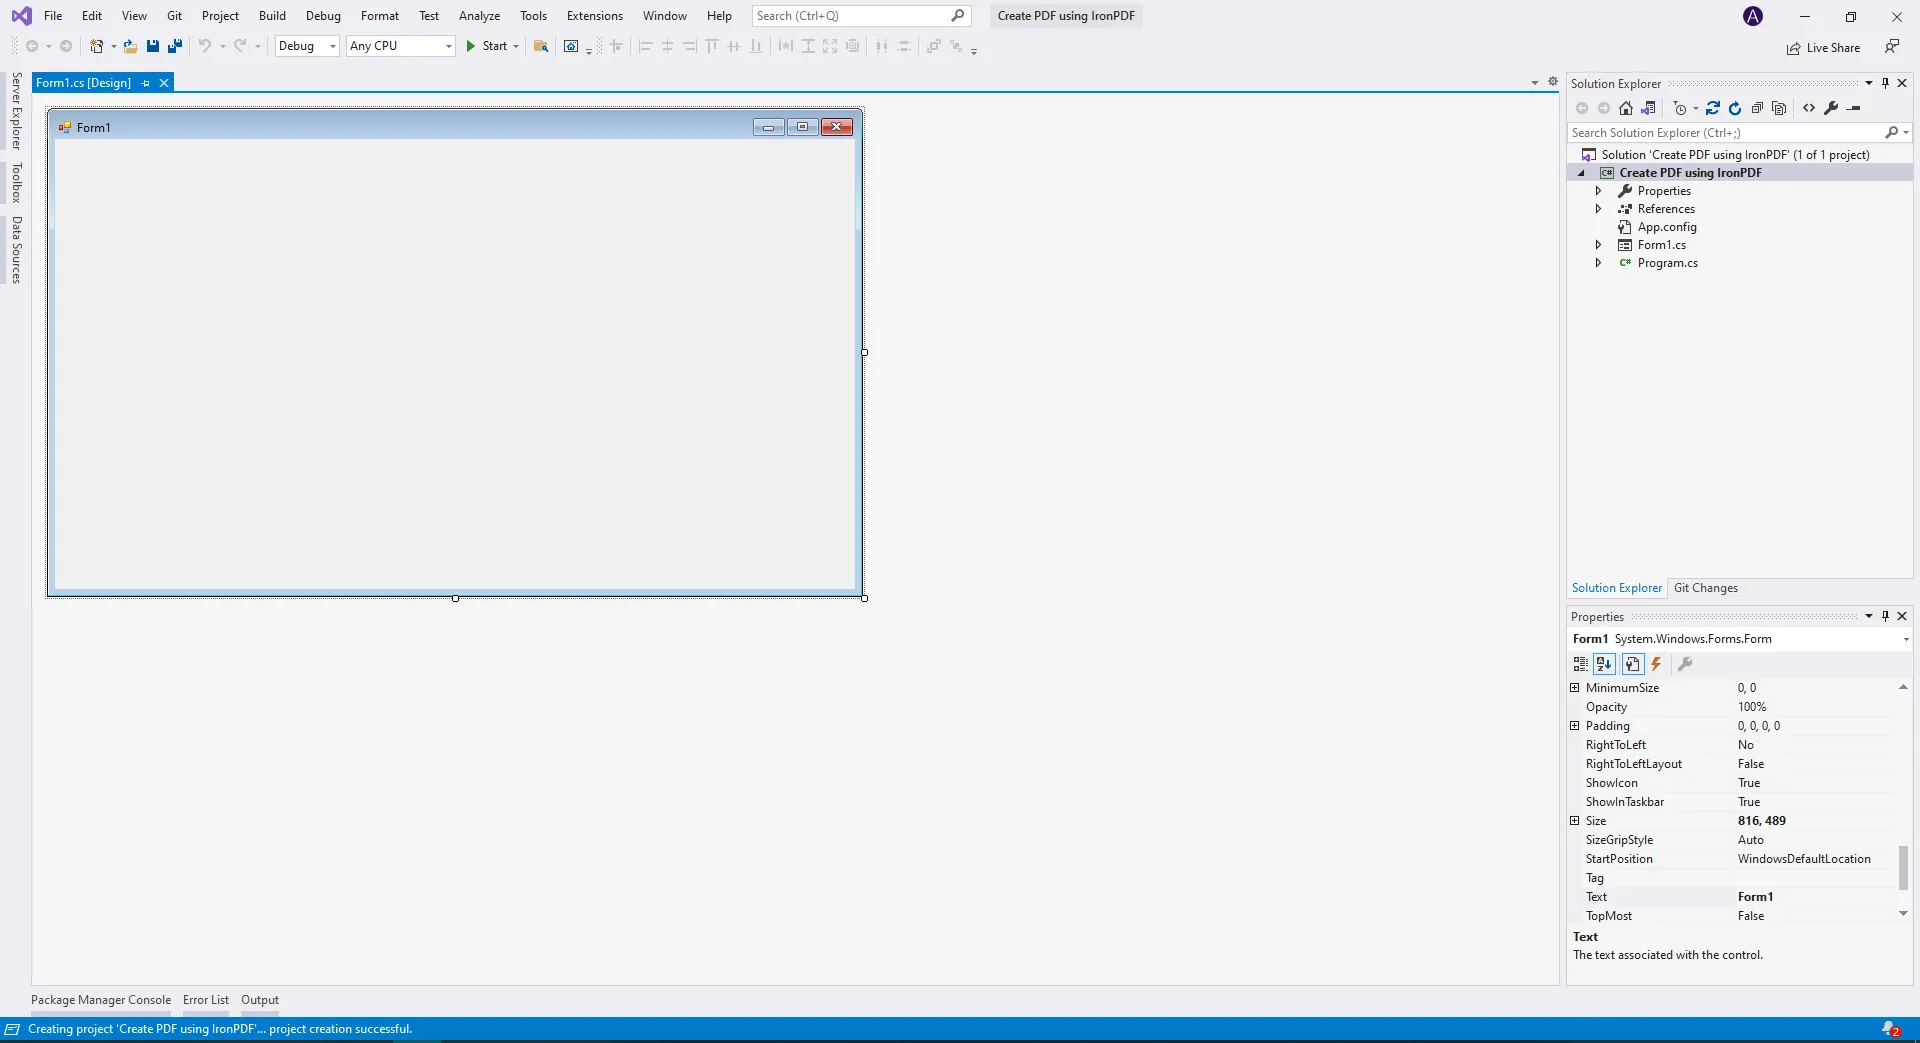 5 steps to Generate a PDF File in C# using IronPDF, Figure 4: First window after creating a new project